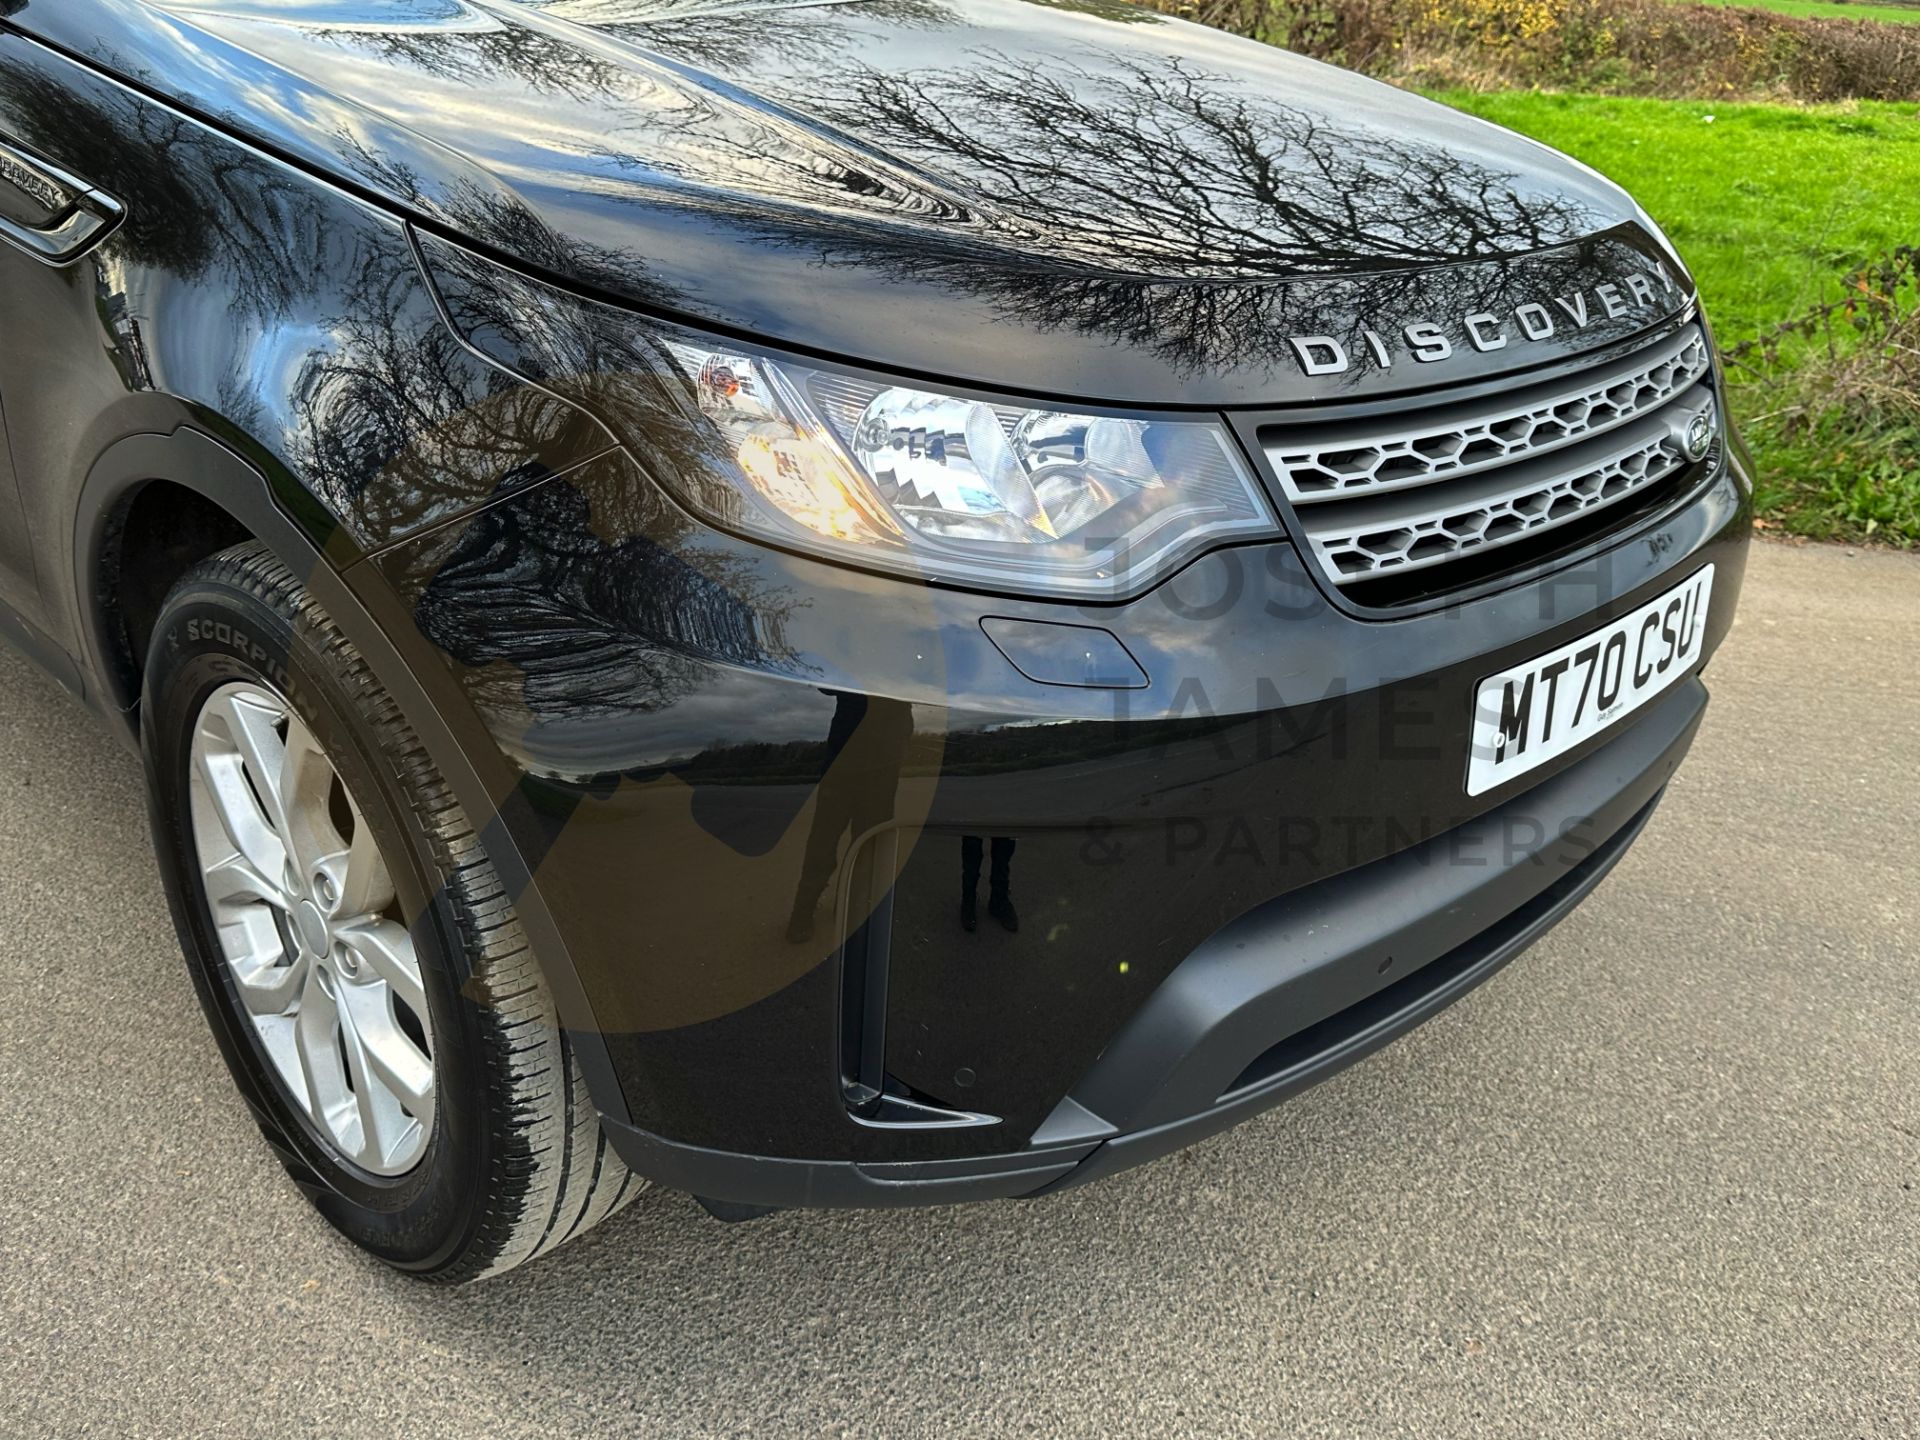 LAND ROVER DISCOVERY 5 *ALL NEW MODEL* (2021 - EURO 6) 8 SPEED AUTO (1 OWNER) *ONLY 19,000 MILES* - Image 15 of 50